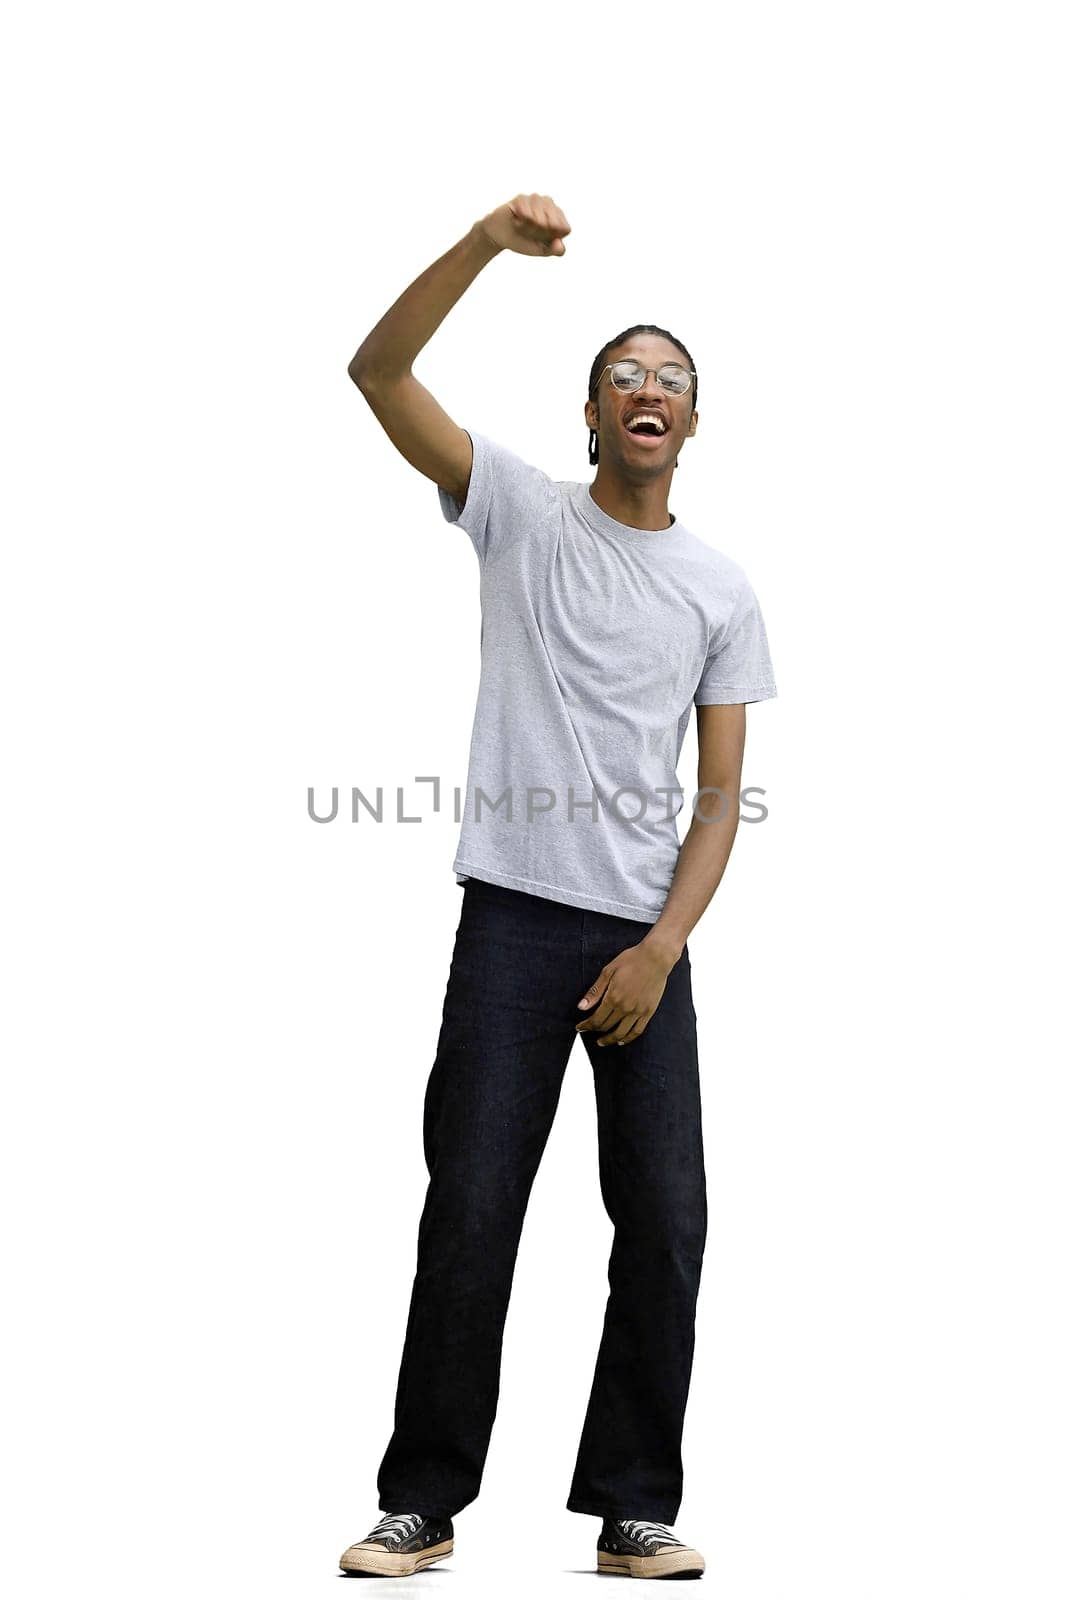 A man in a gray T-shirt, on a white background, in full height, rejoices.